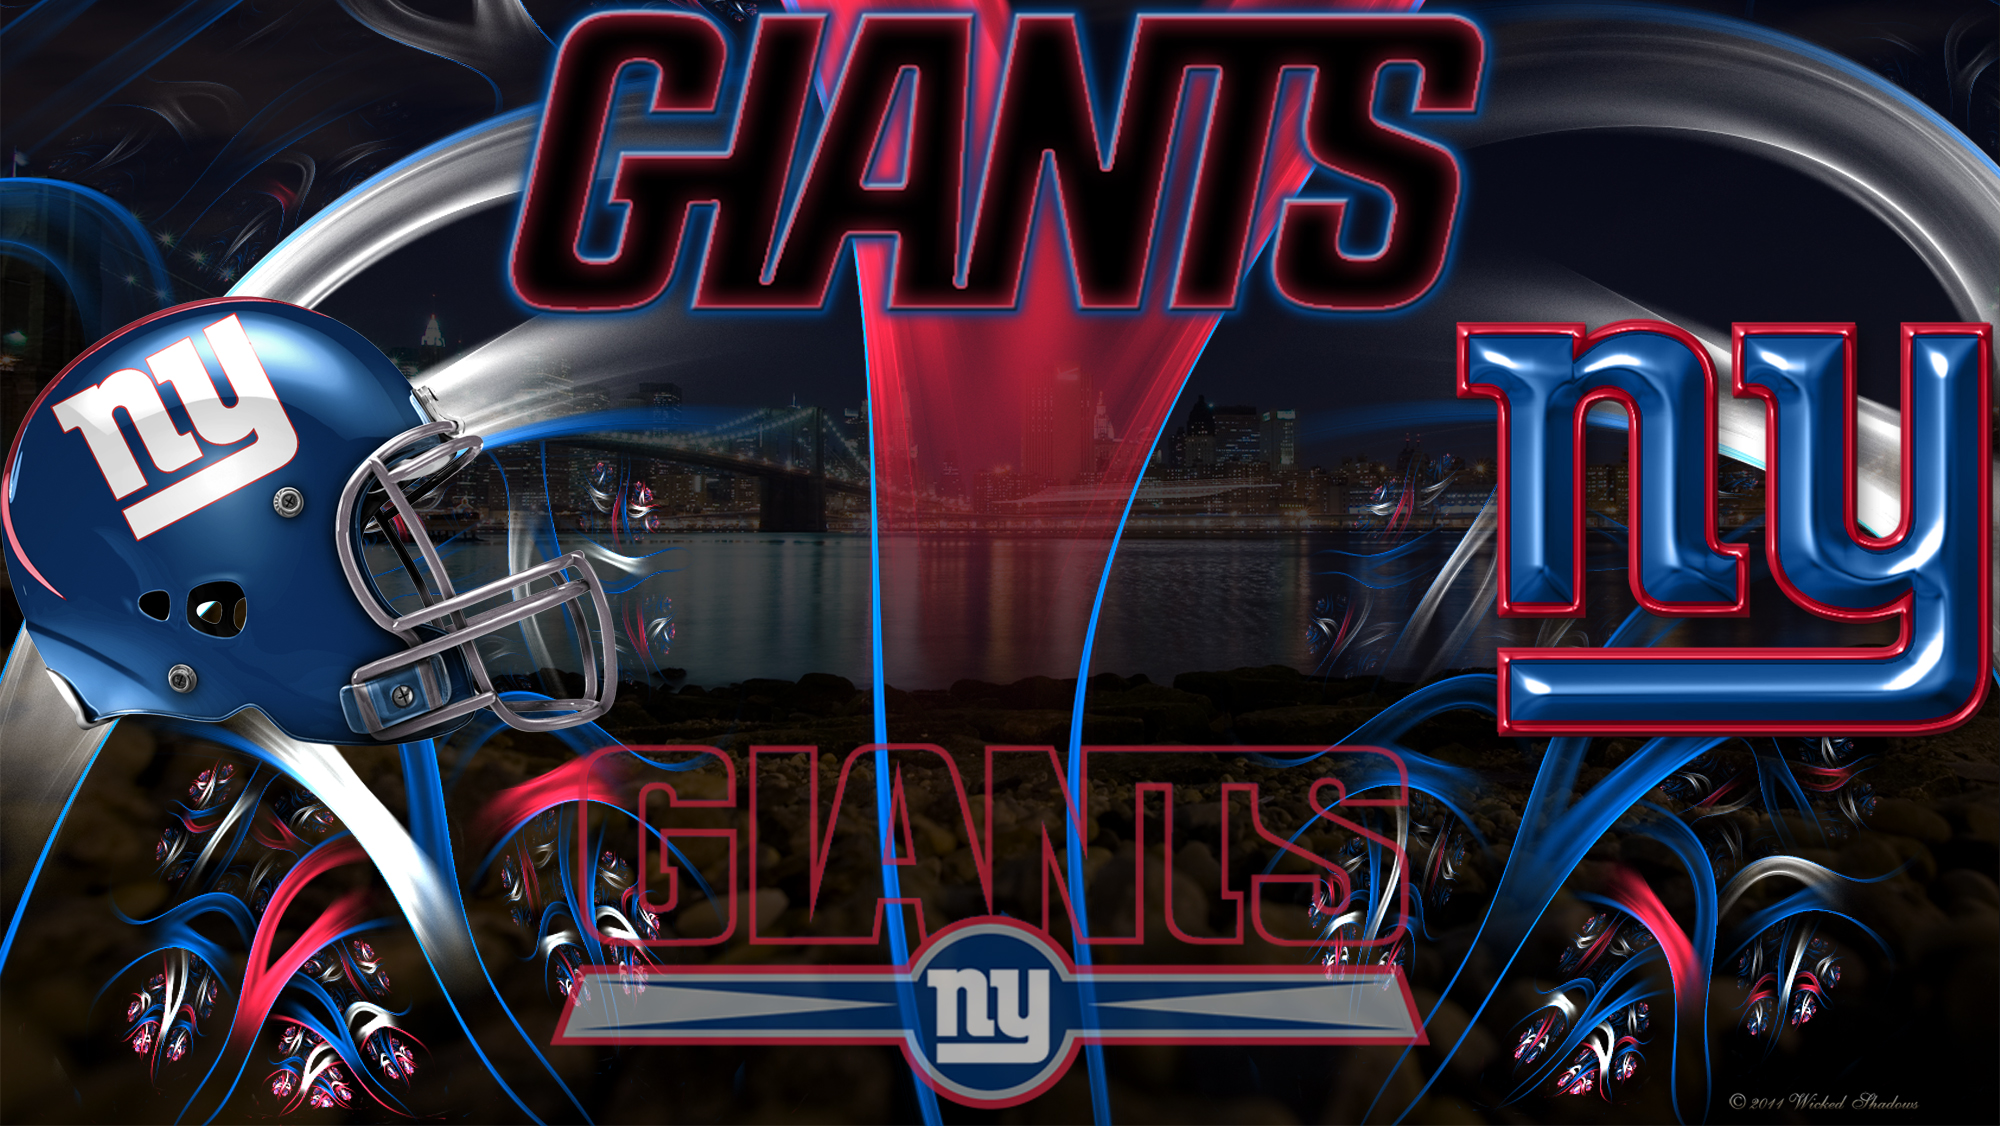 Hope You Like This New York Giants Wallpaper Background In High